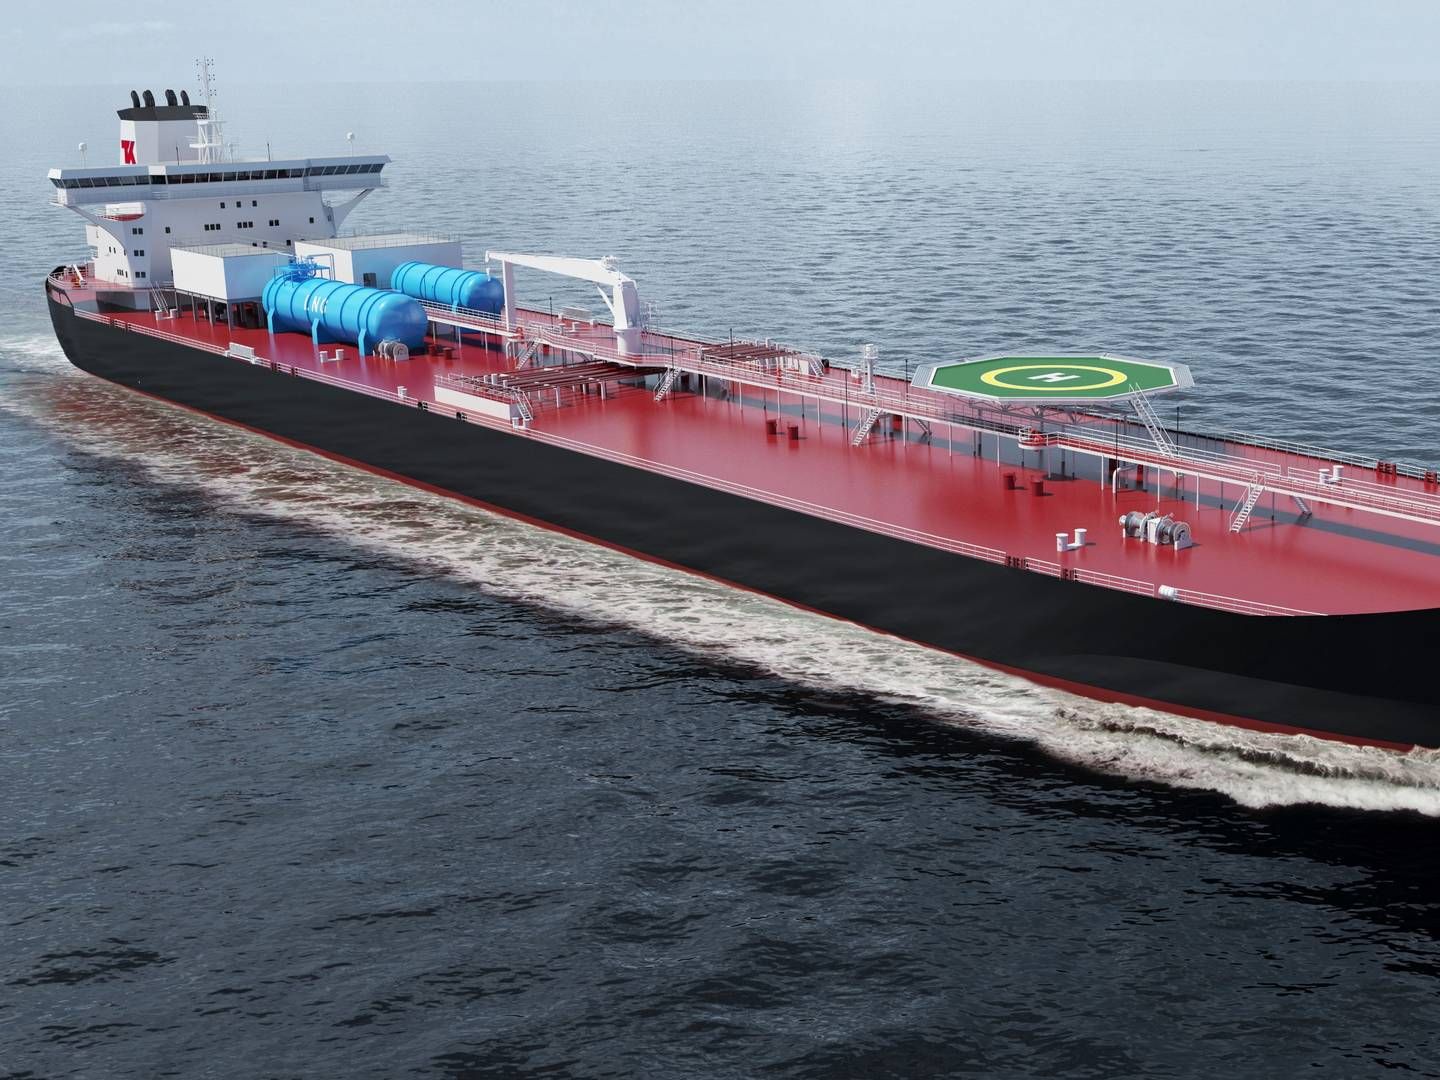 Teekay Tankers is among the companies that Danske Bank is financing, even though the bank's investment department has blacklisted the company for being a fossil fuel company. | Photo: Pr-foto: Teekay Tankers & Wärtsilä